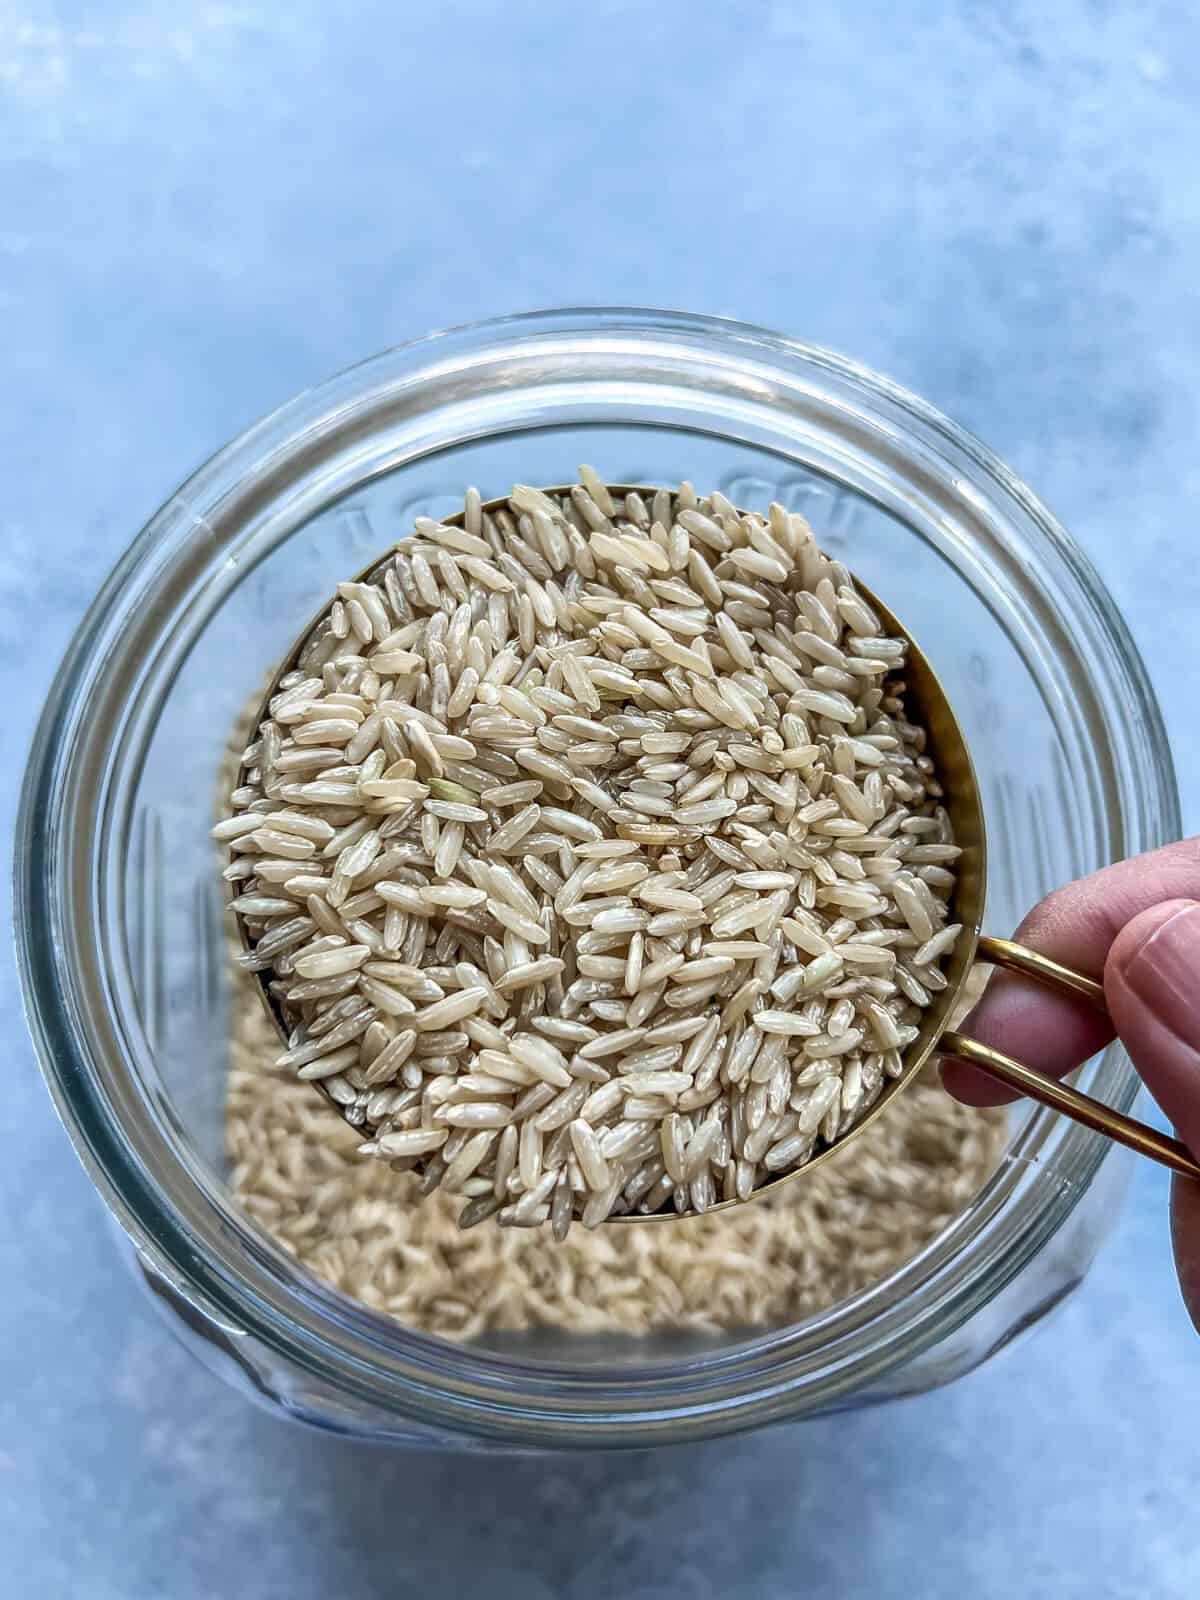 Scooping a cup of brown rice from a jar.